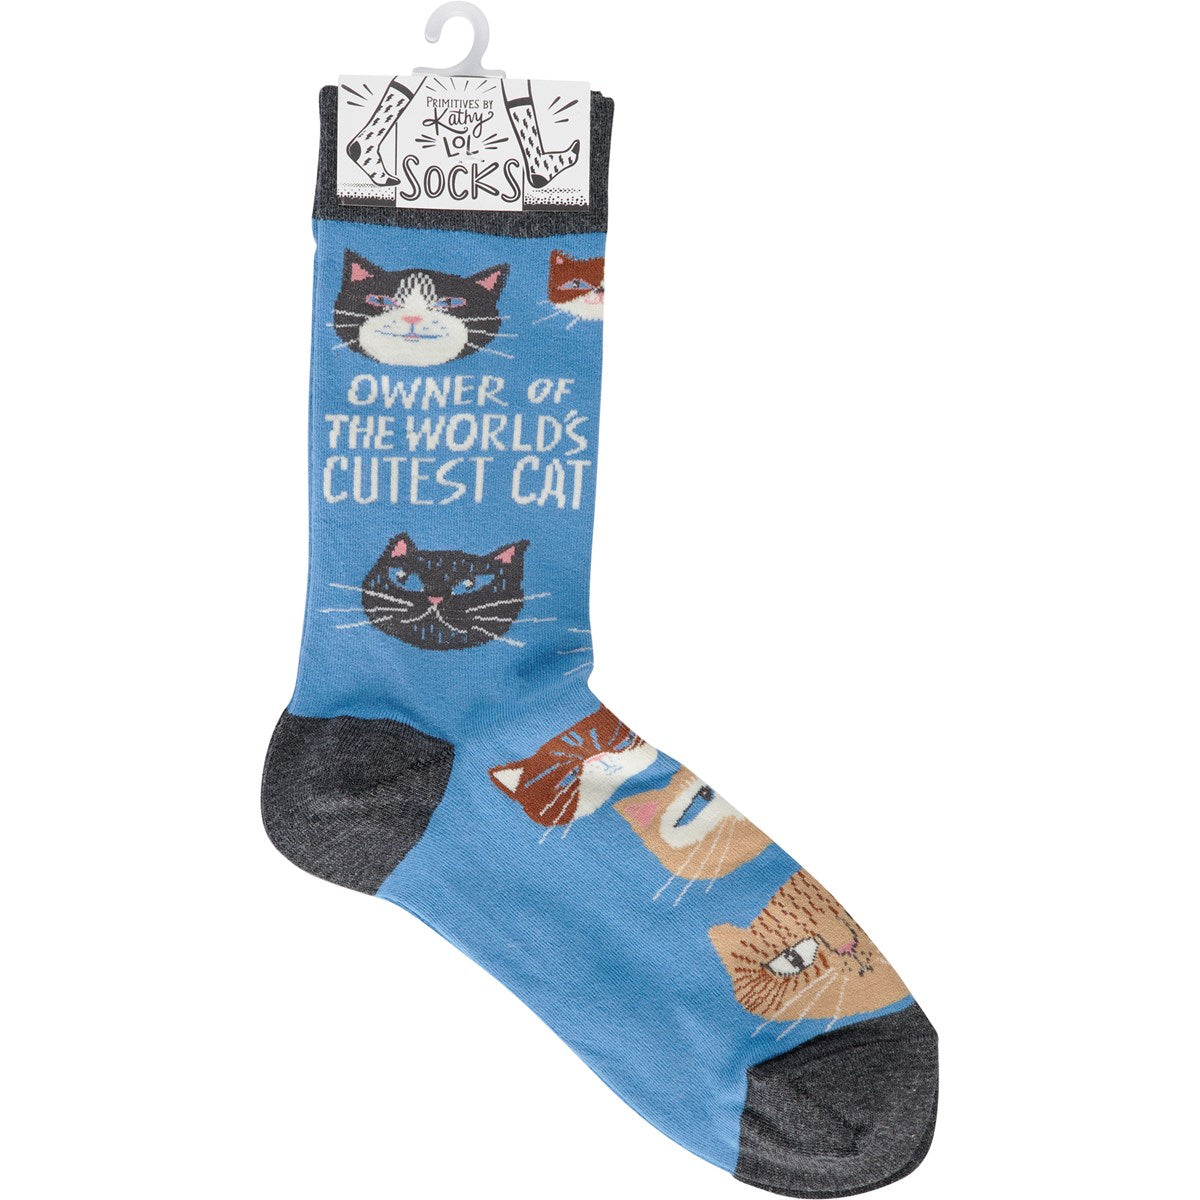 Owner of the World's Cutest Cat Socks (One Size Fits Most)